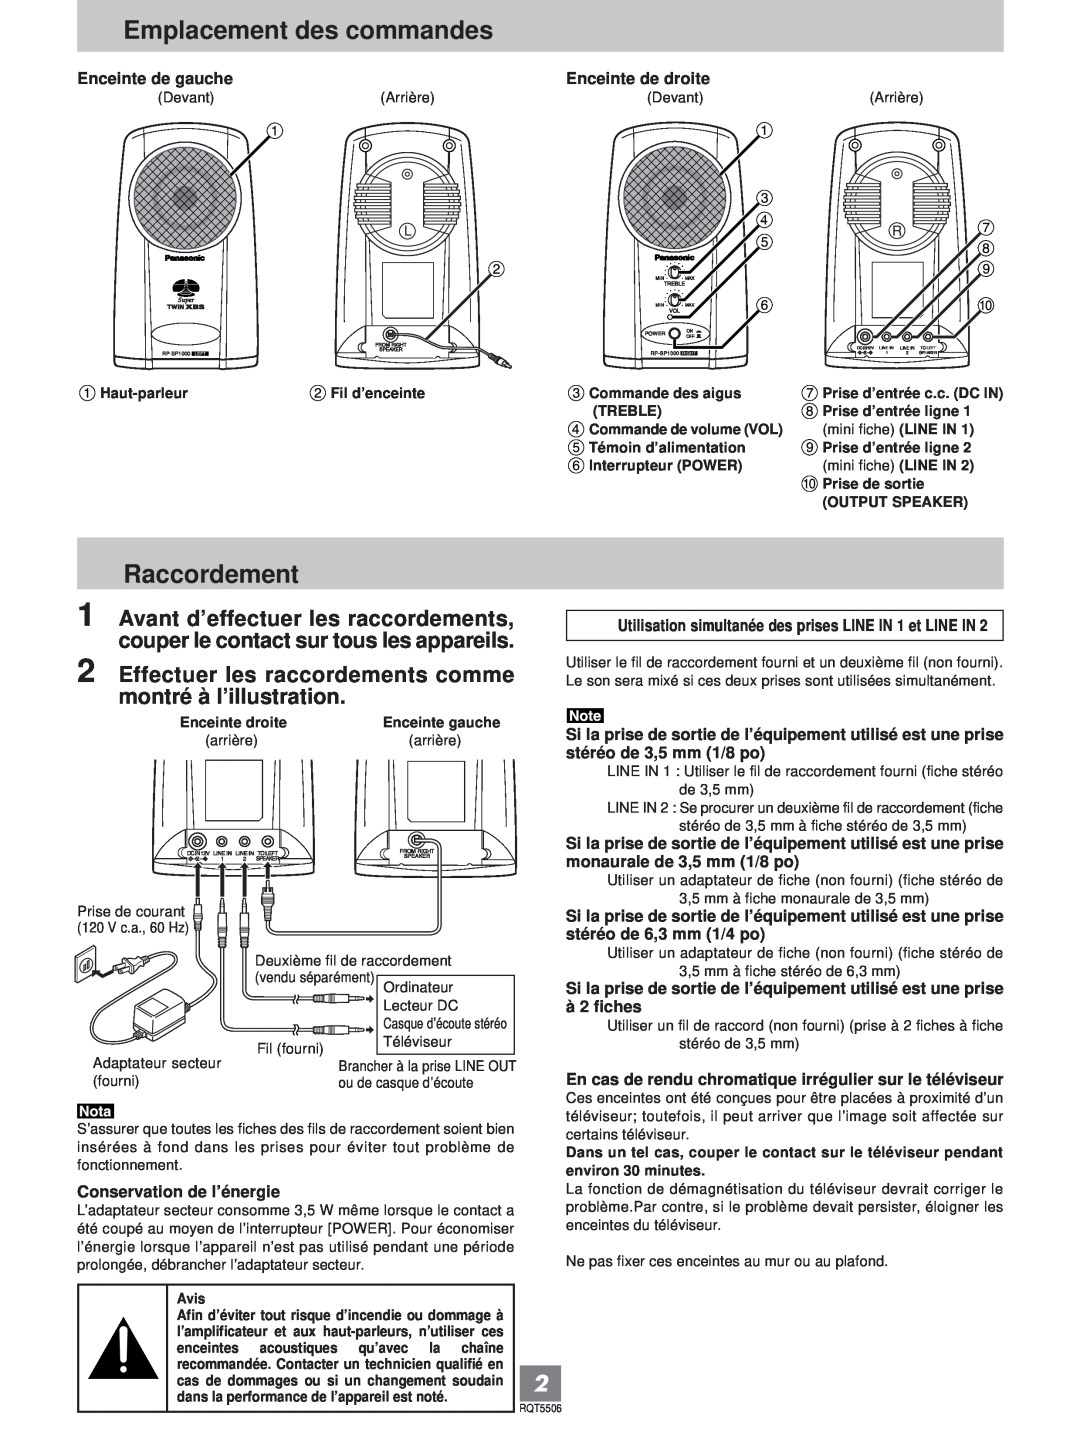 Panasonic RP-SP1000 operating instructions Emplacement des commandes, Raccordement 